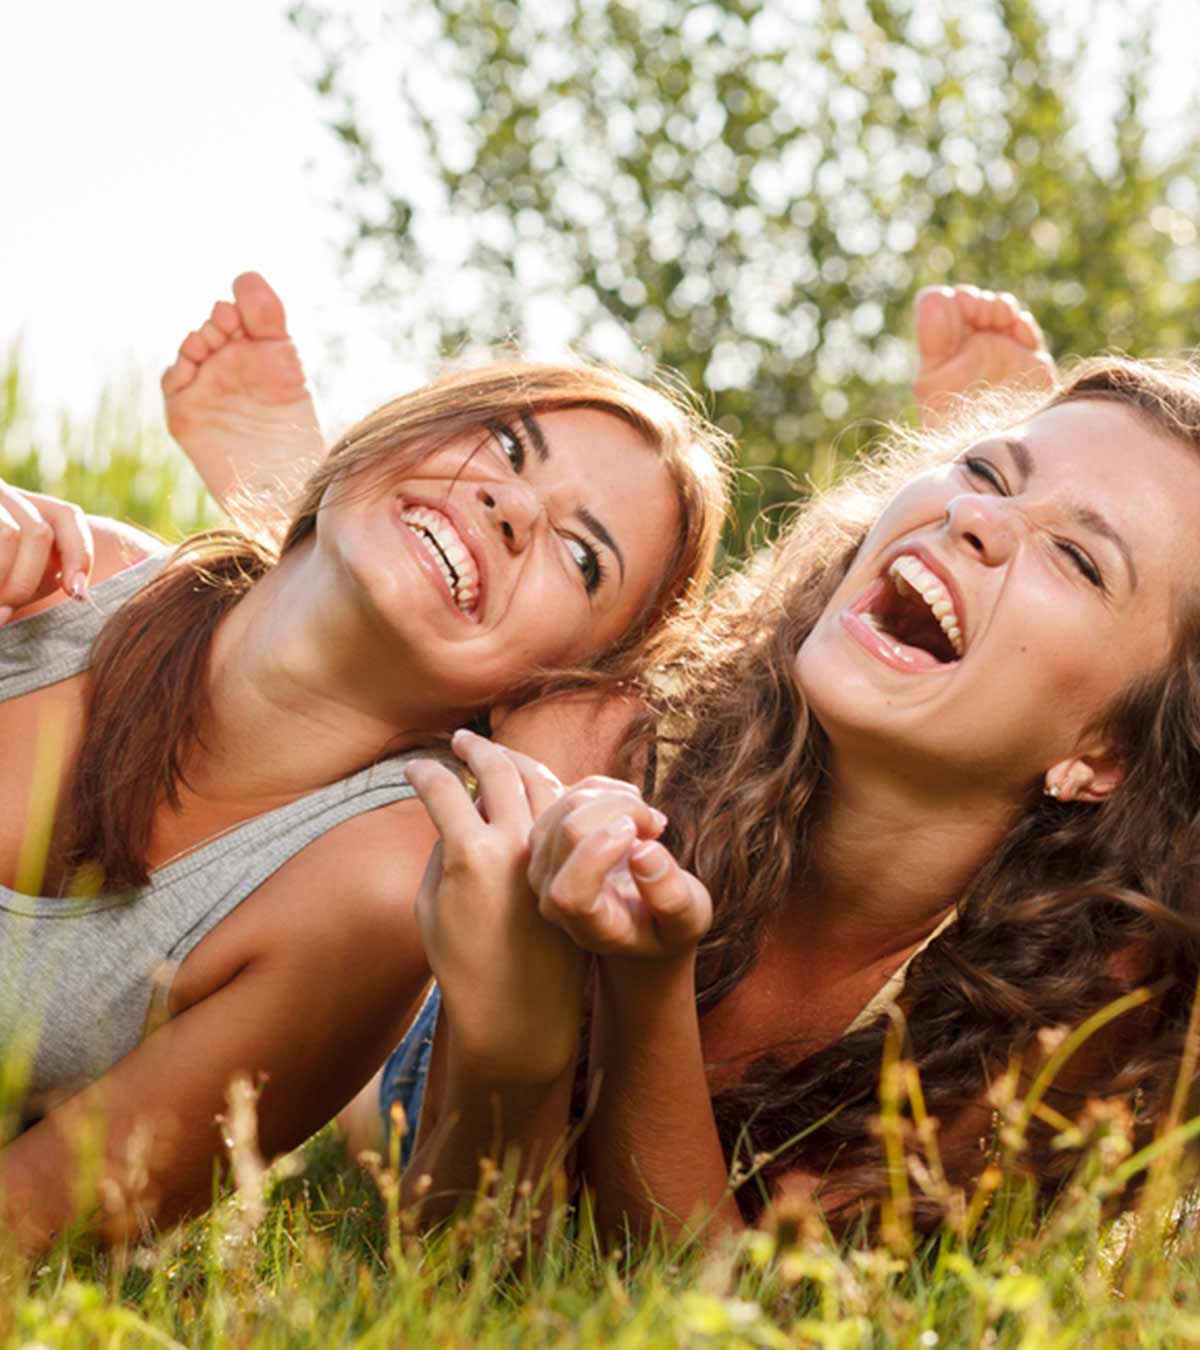 27 Irreplaceable And Important Qualities Of A Good Friend